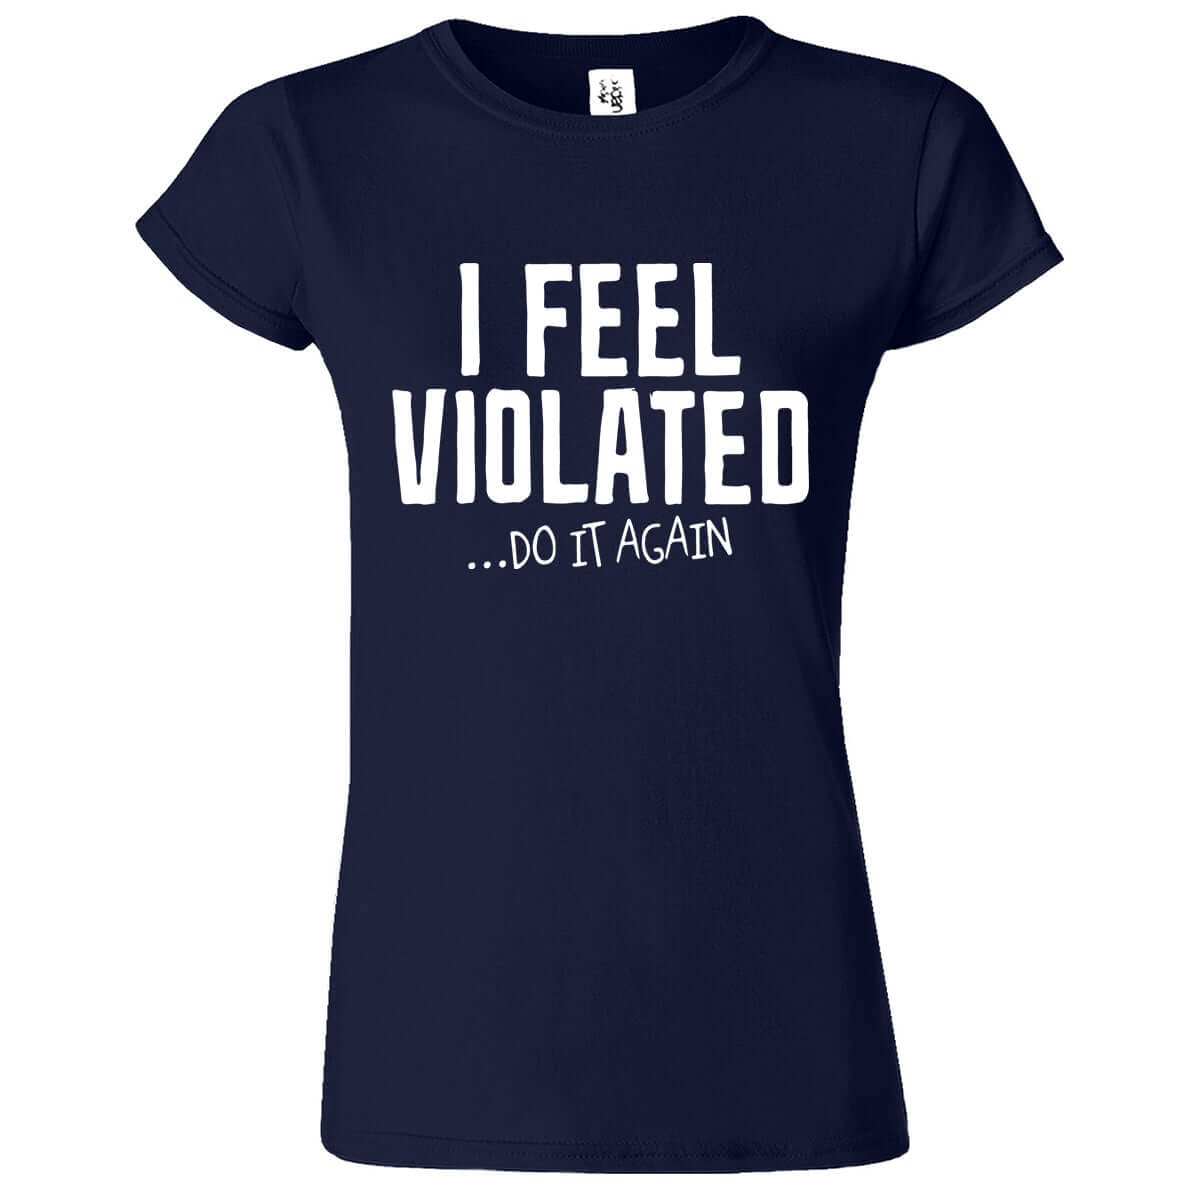 I Feel Violated Printed T-Shirt for Women's - ApparelinClick